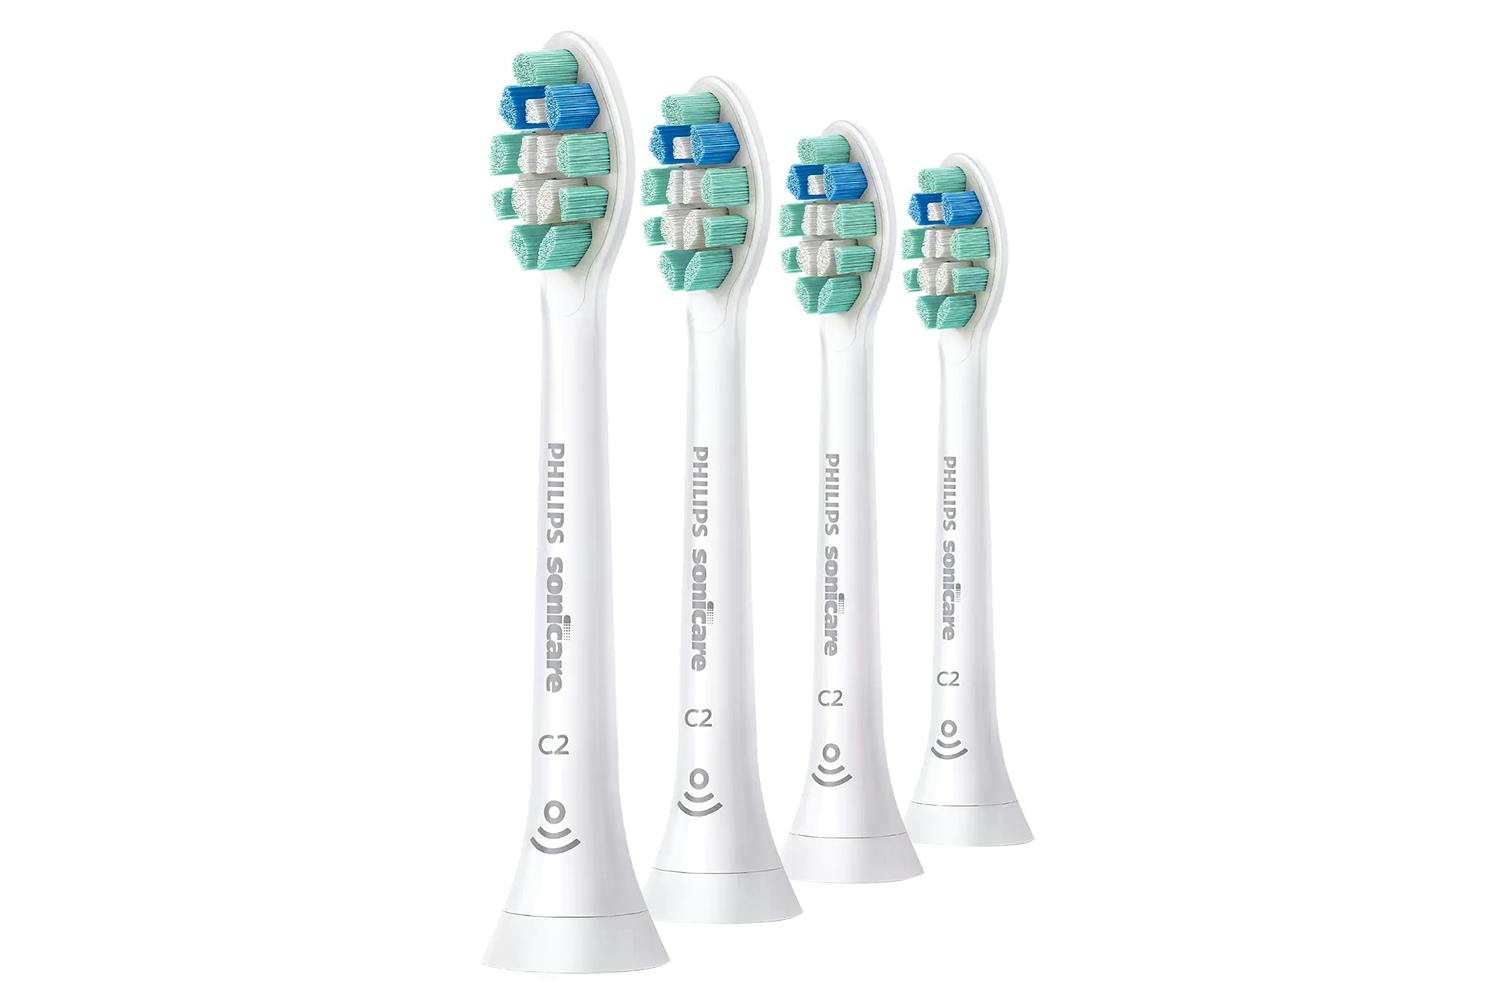 Philips Sonicare C2 Optimal Plaque Defence Toothbrush Head | HX9024/10 | Pack of 4